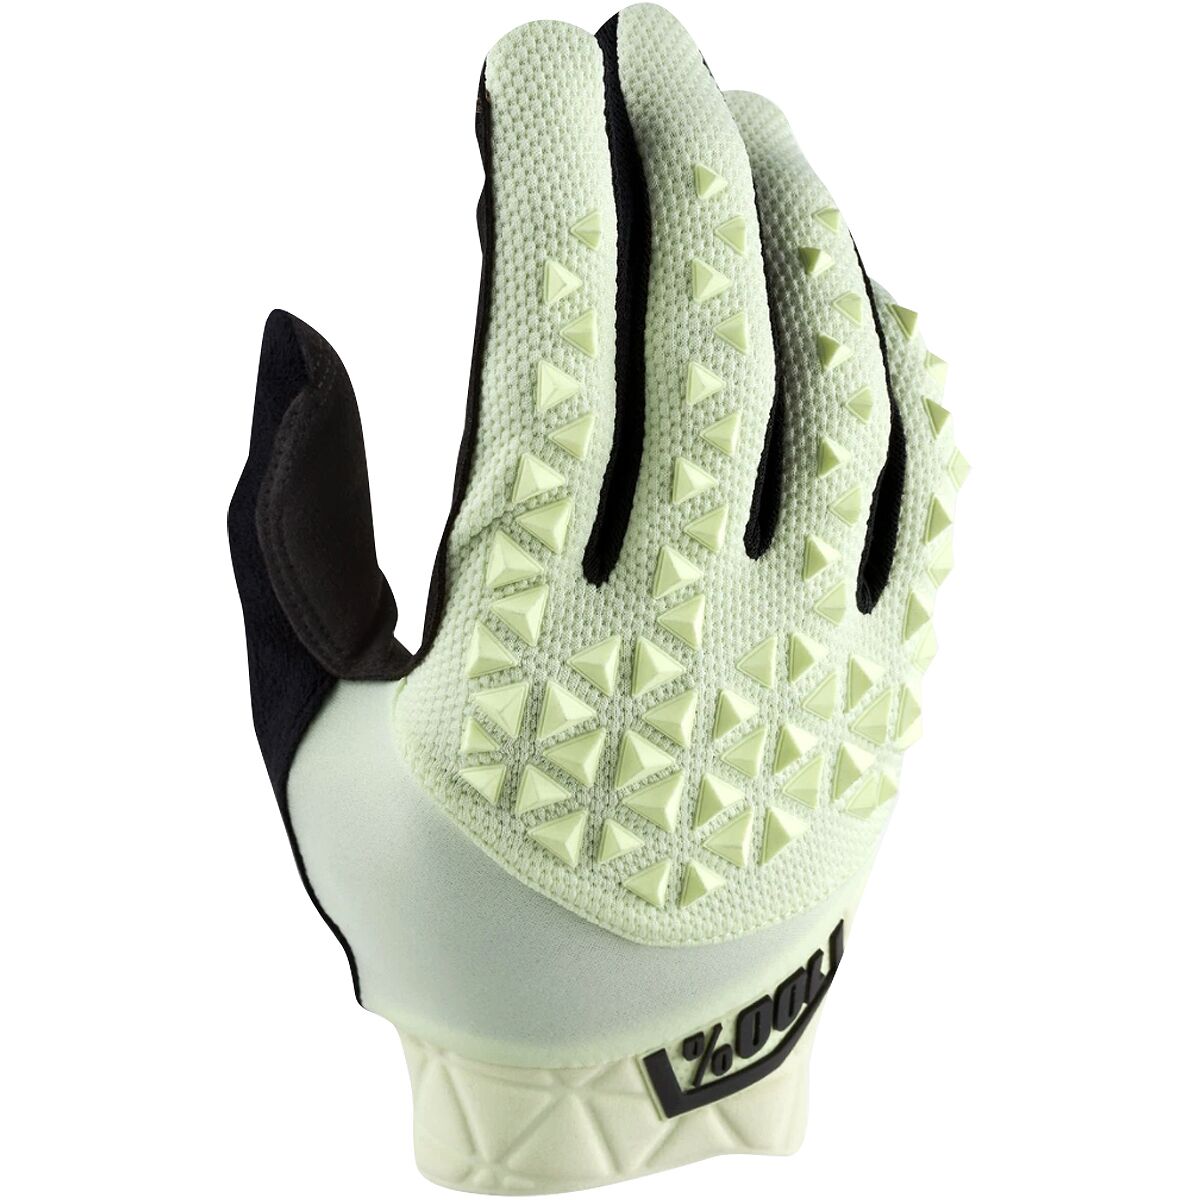 Ride 100 Geomatic Cycling Glove Sky Blue LG for sale online 